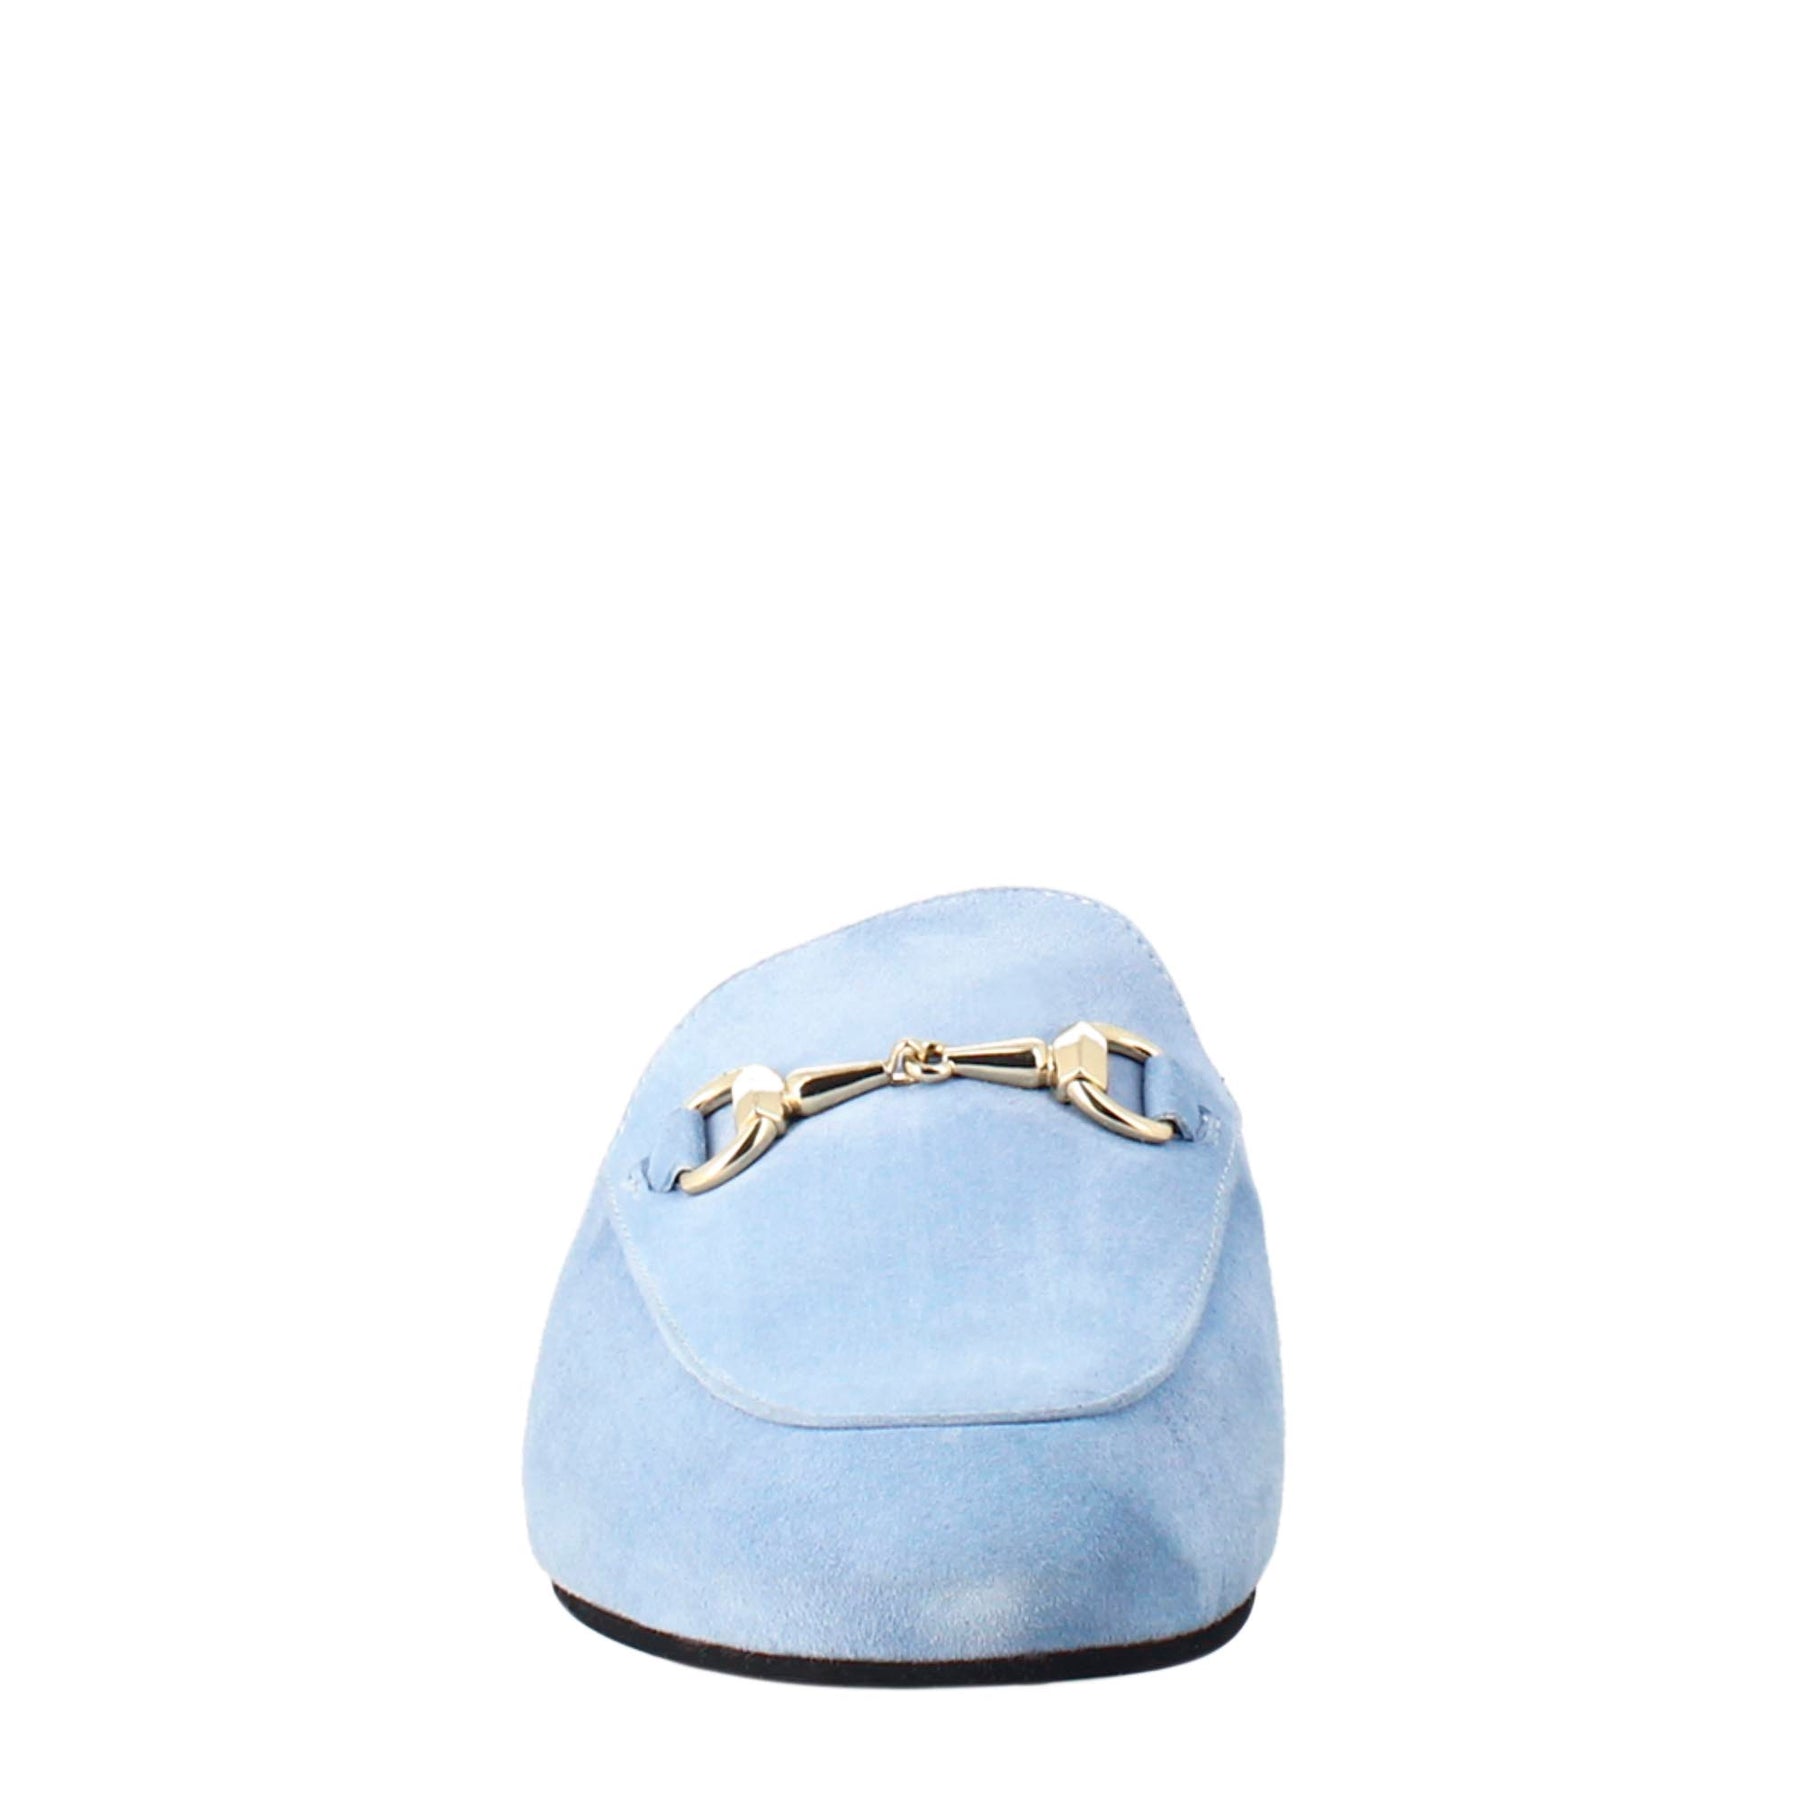 Women's sabot in light blue suede with gold buckle